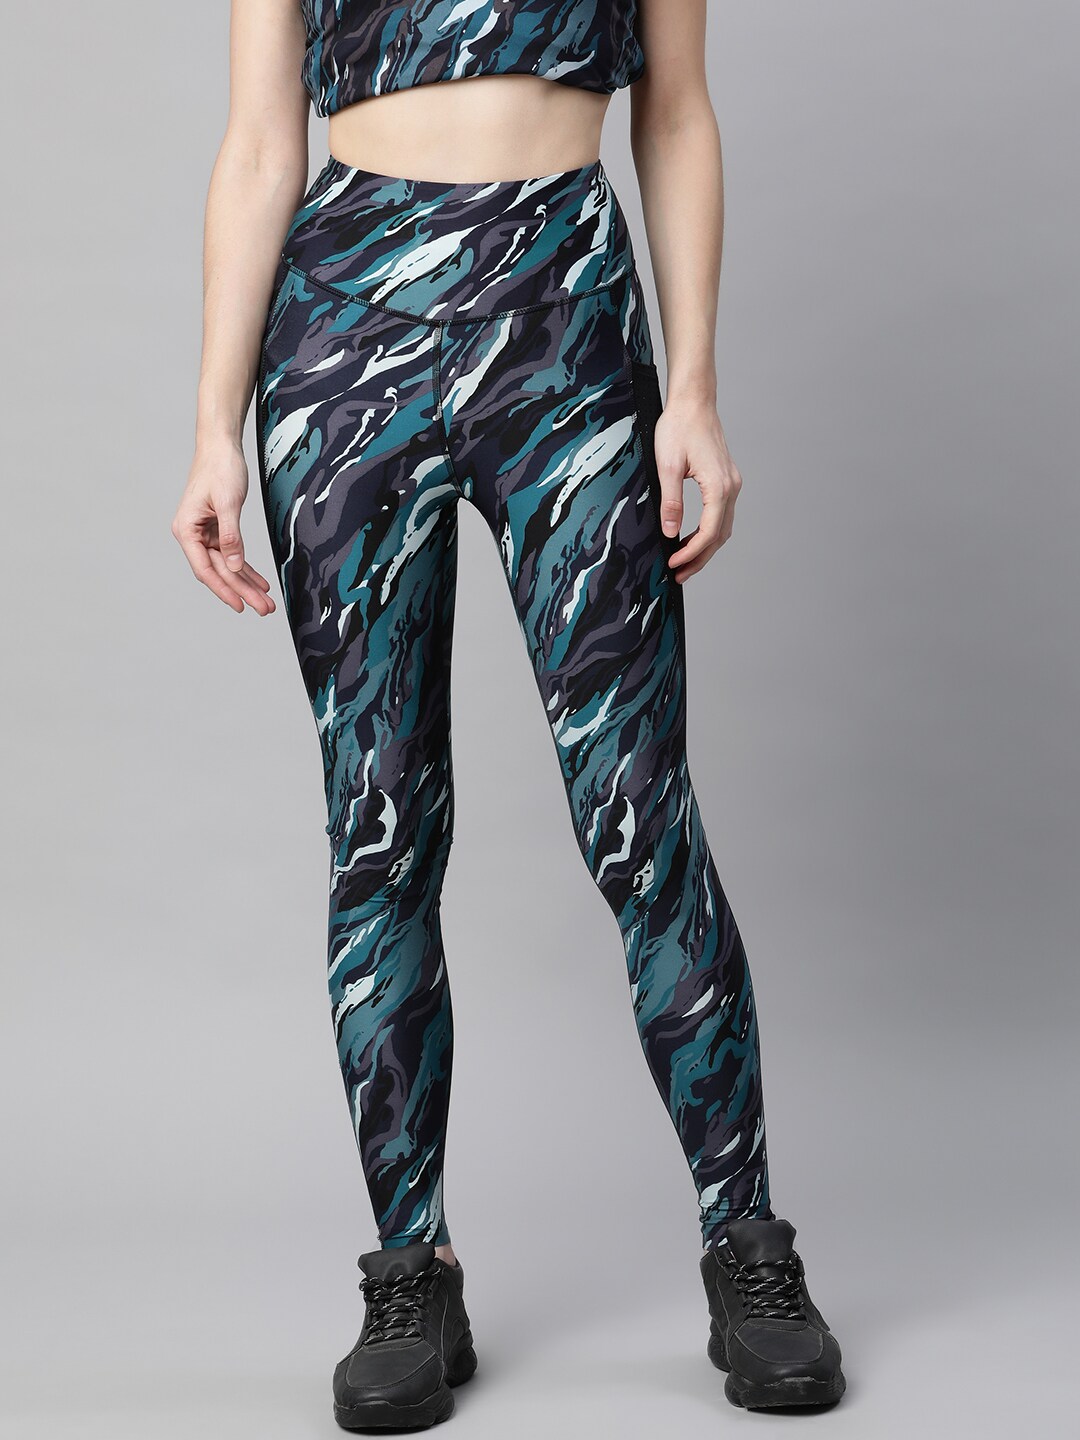 Marks & Spencer Women Teal & Black Camouflage Printed Go Train Gym Tights Price in India